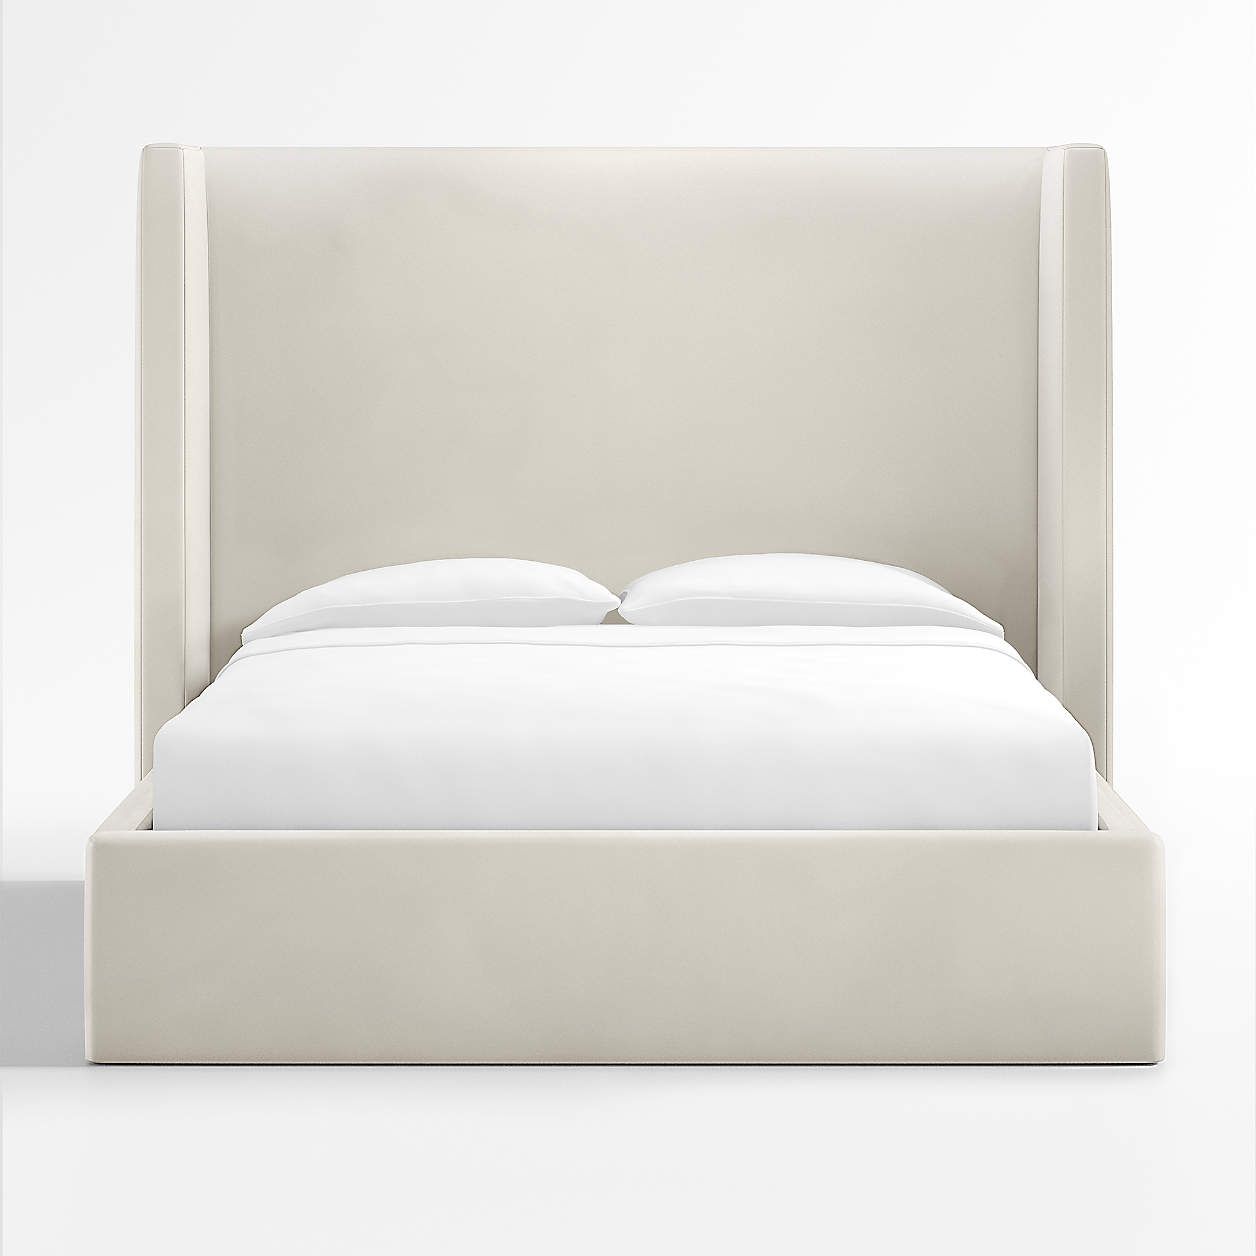 Arden Linen Oyster Grey Upholstered Queen Bed with 52" Headboard + Reviews | Crate & Barrel | Crate & Barrel